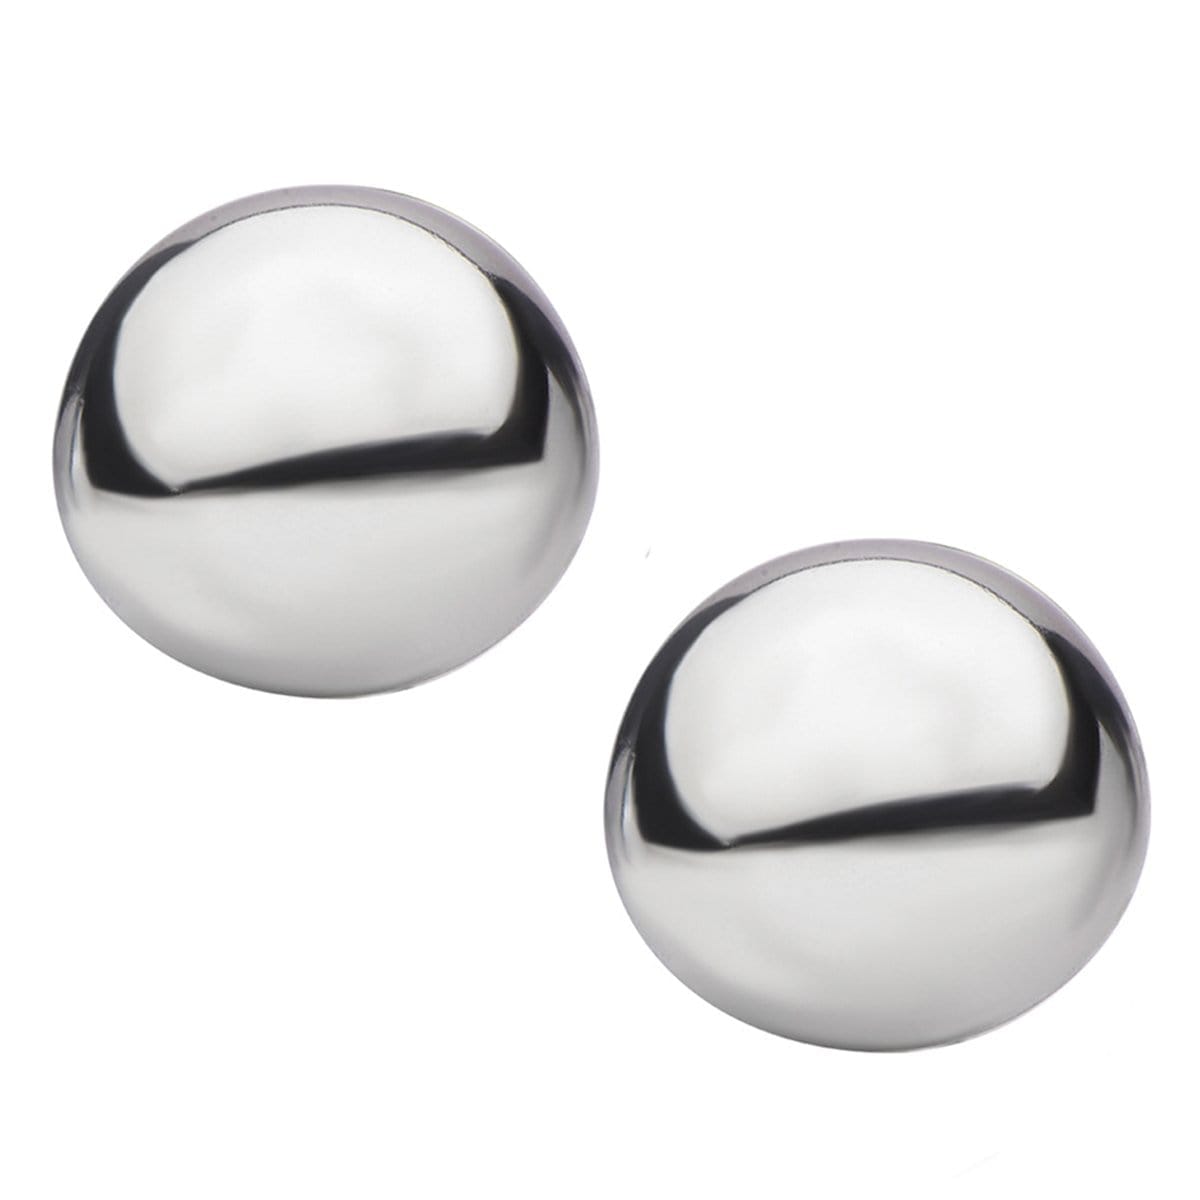 INOX JEWELRY Earrings Silver Tone Stainless Steel Large Round Dome Studs SSE4714